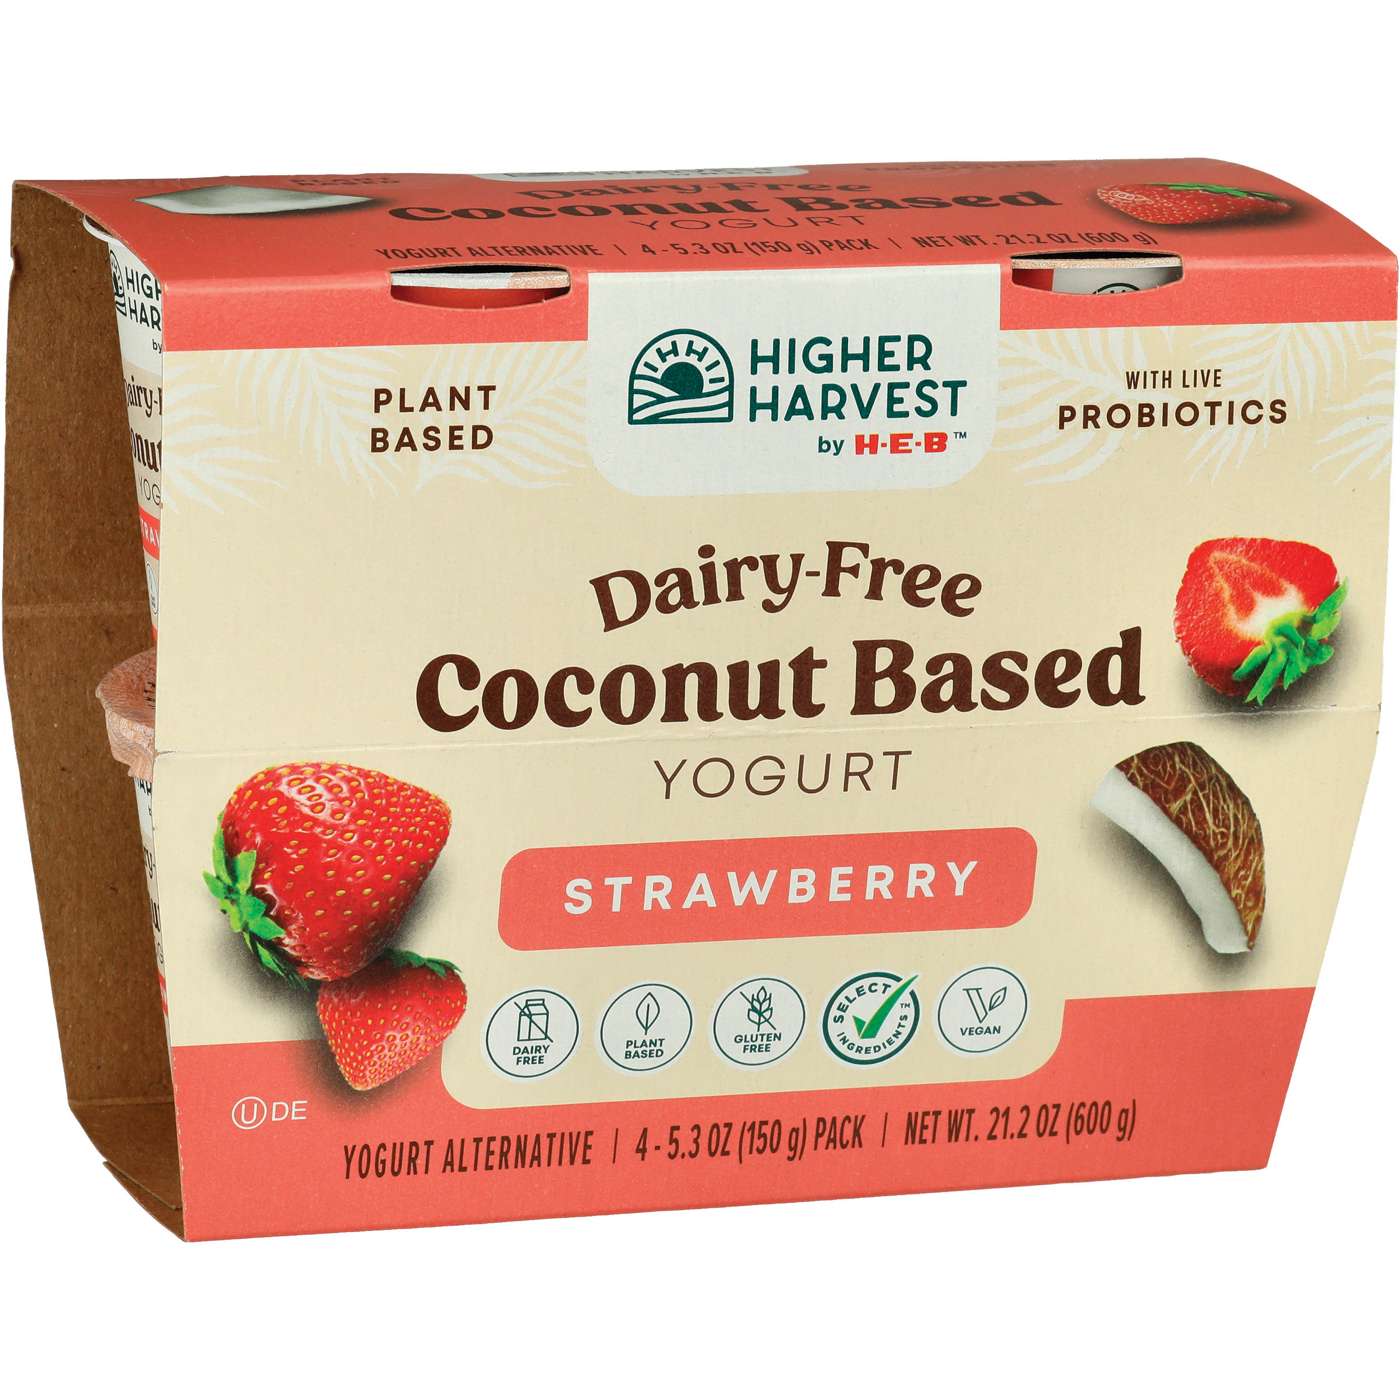 Higher Harvest by H-E-B Dairy-Free Coconut-Based Yogurt – Strawberry; image 2 of 3